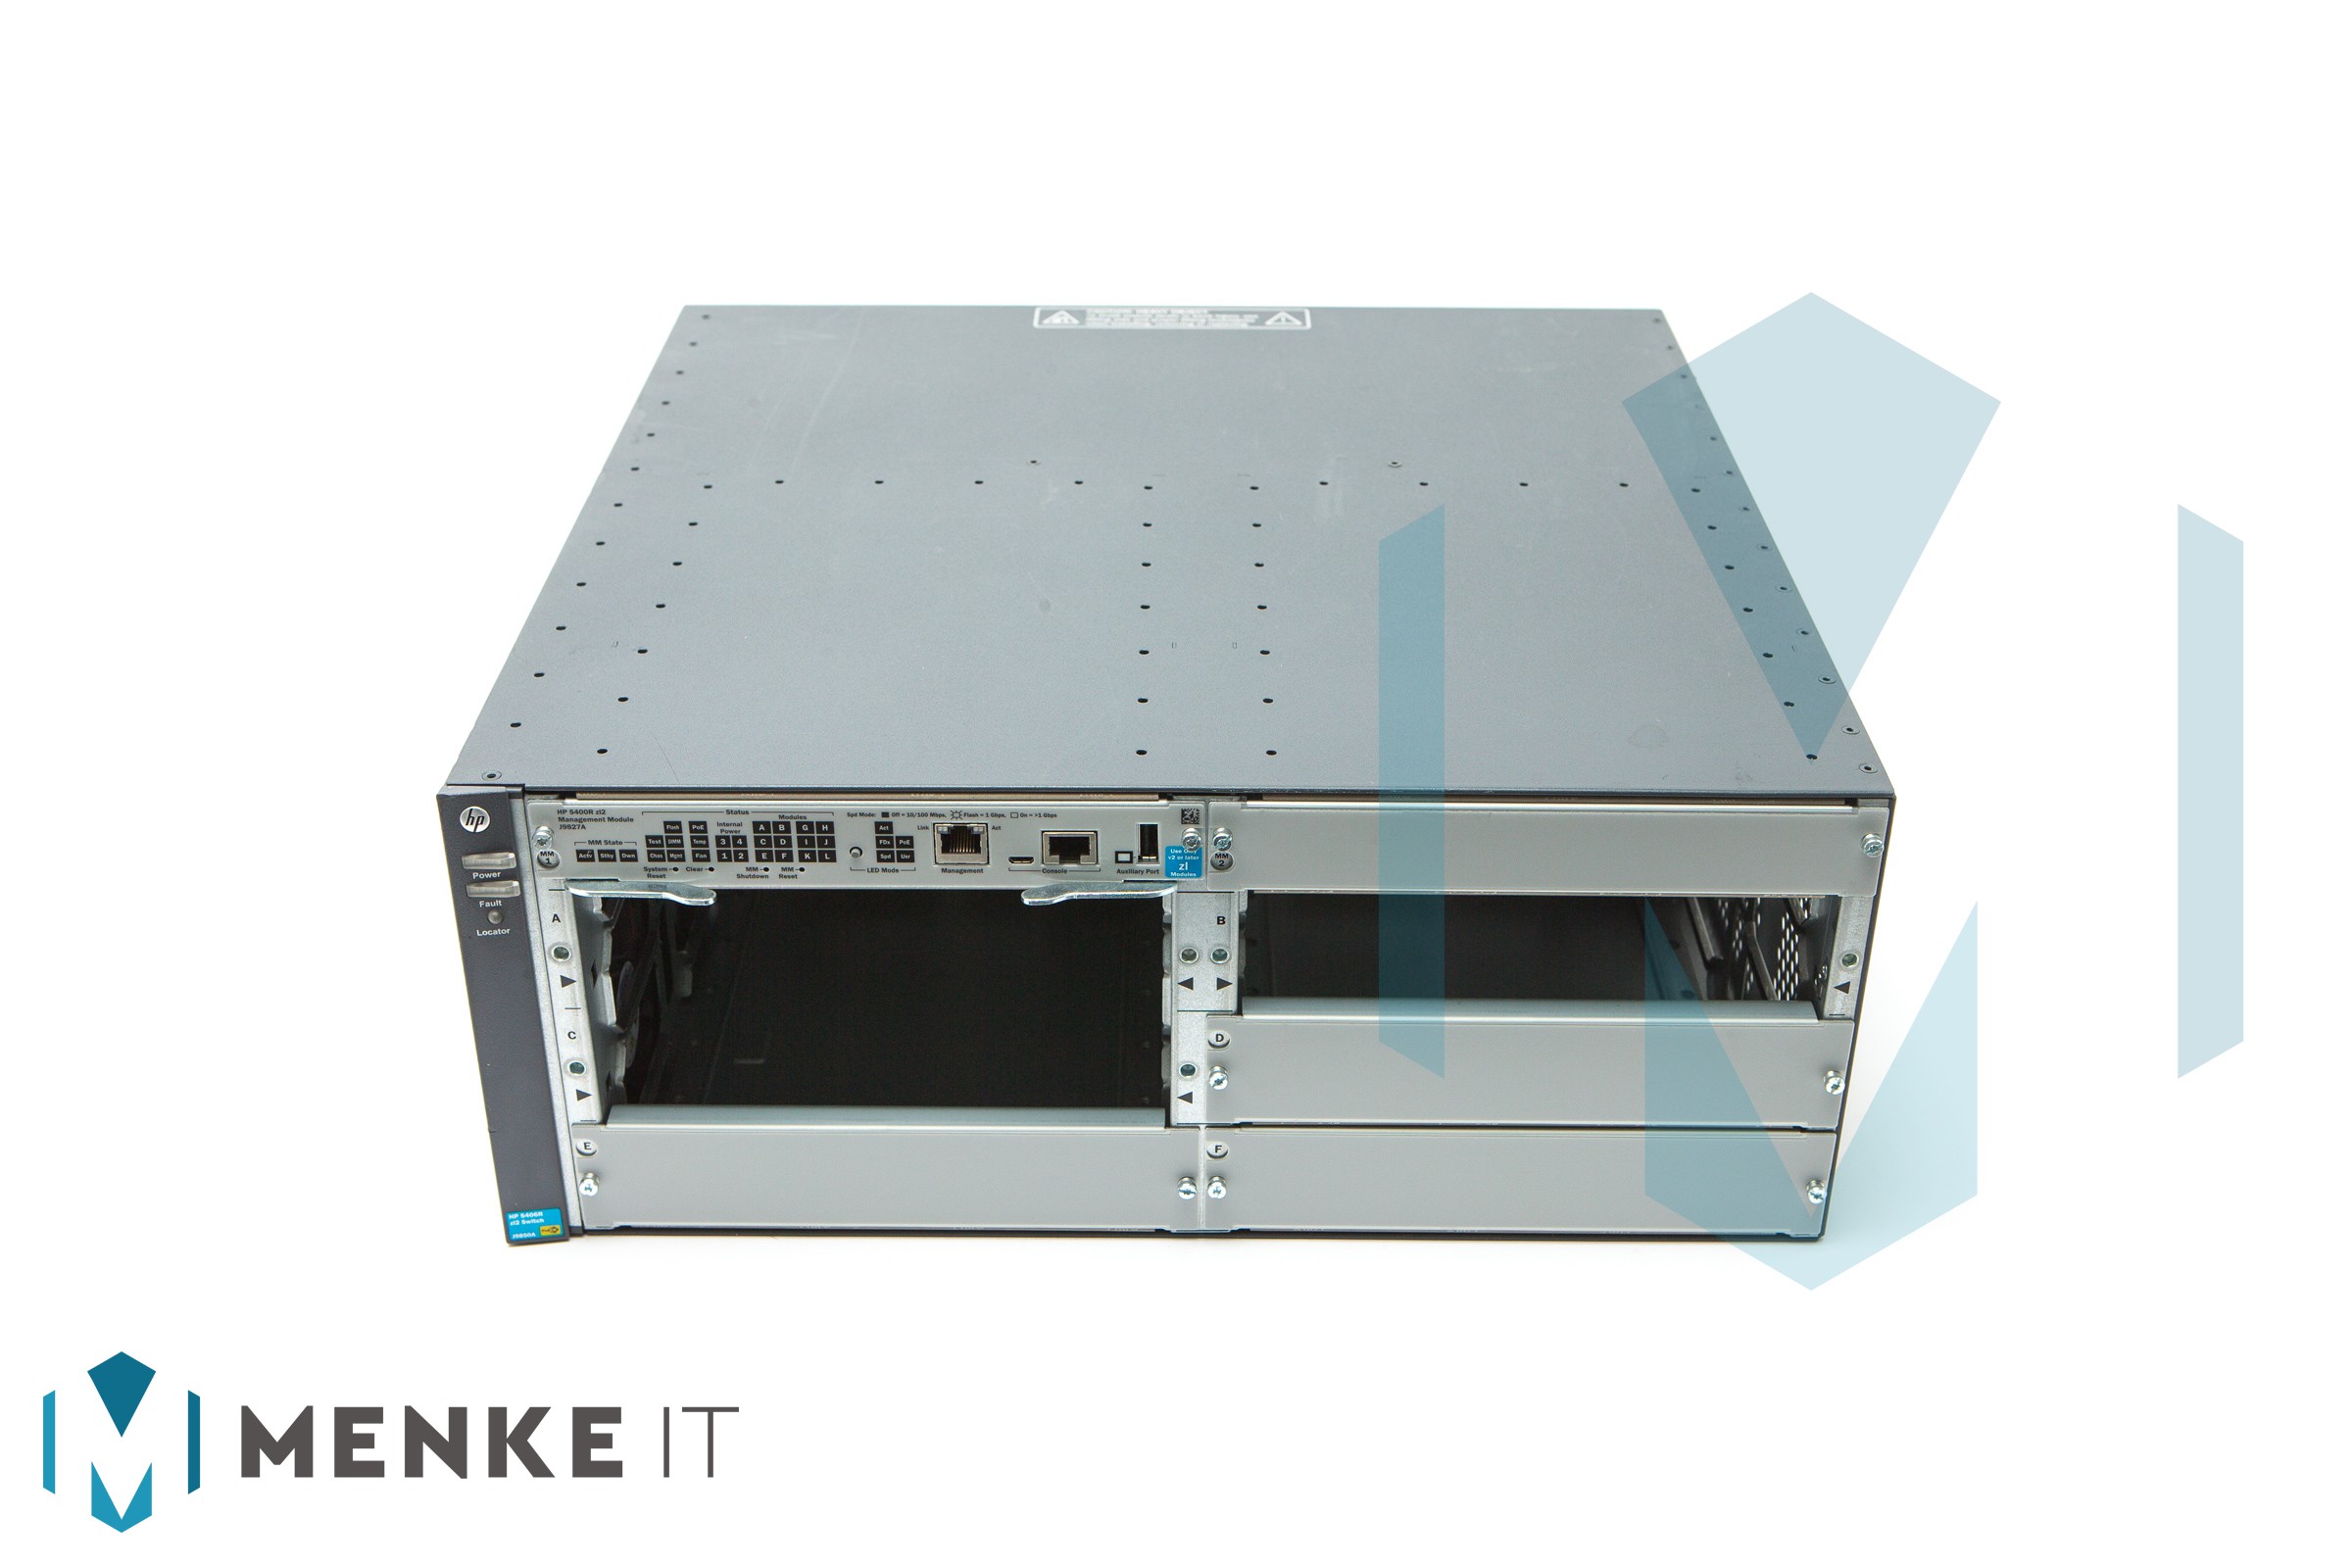 HPE 5406R zl2 Switch Chassis J9821A